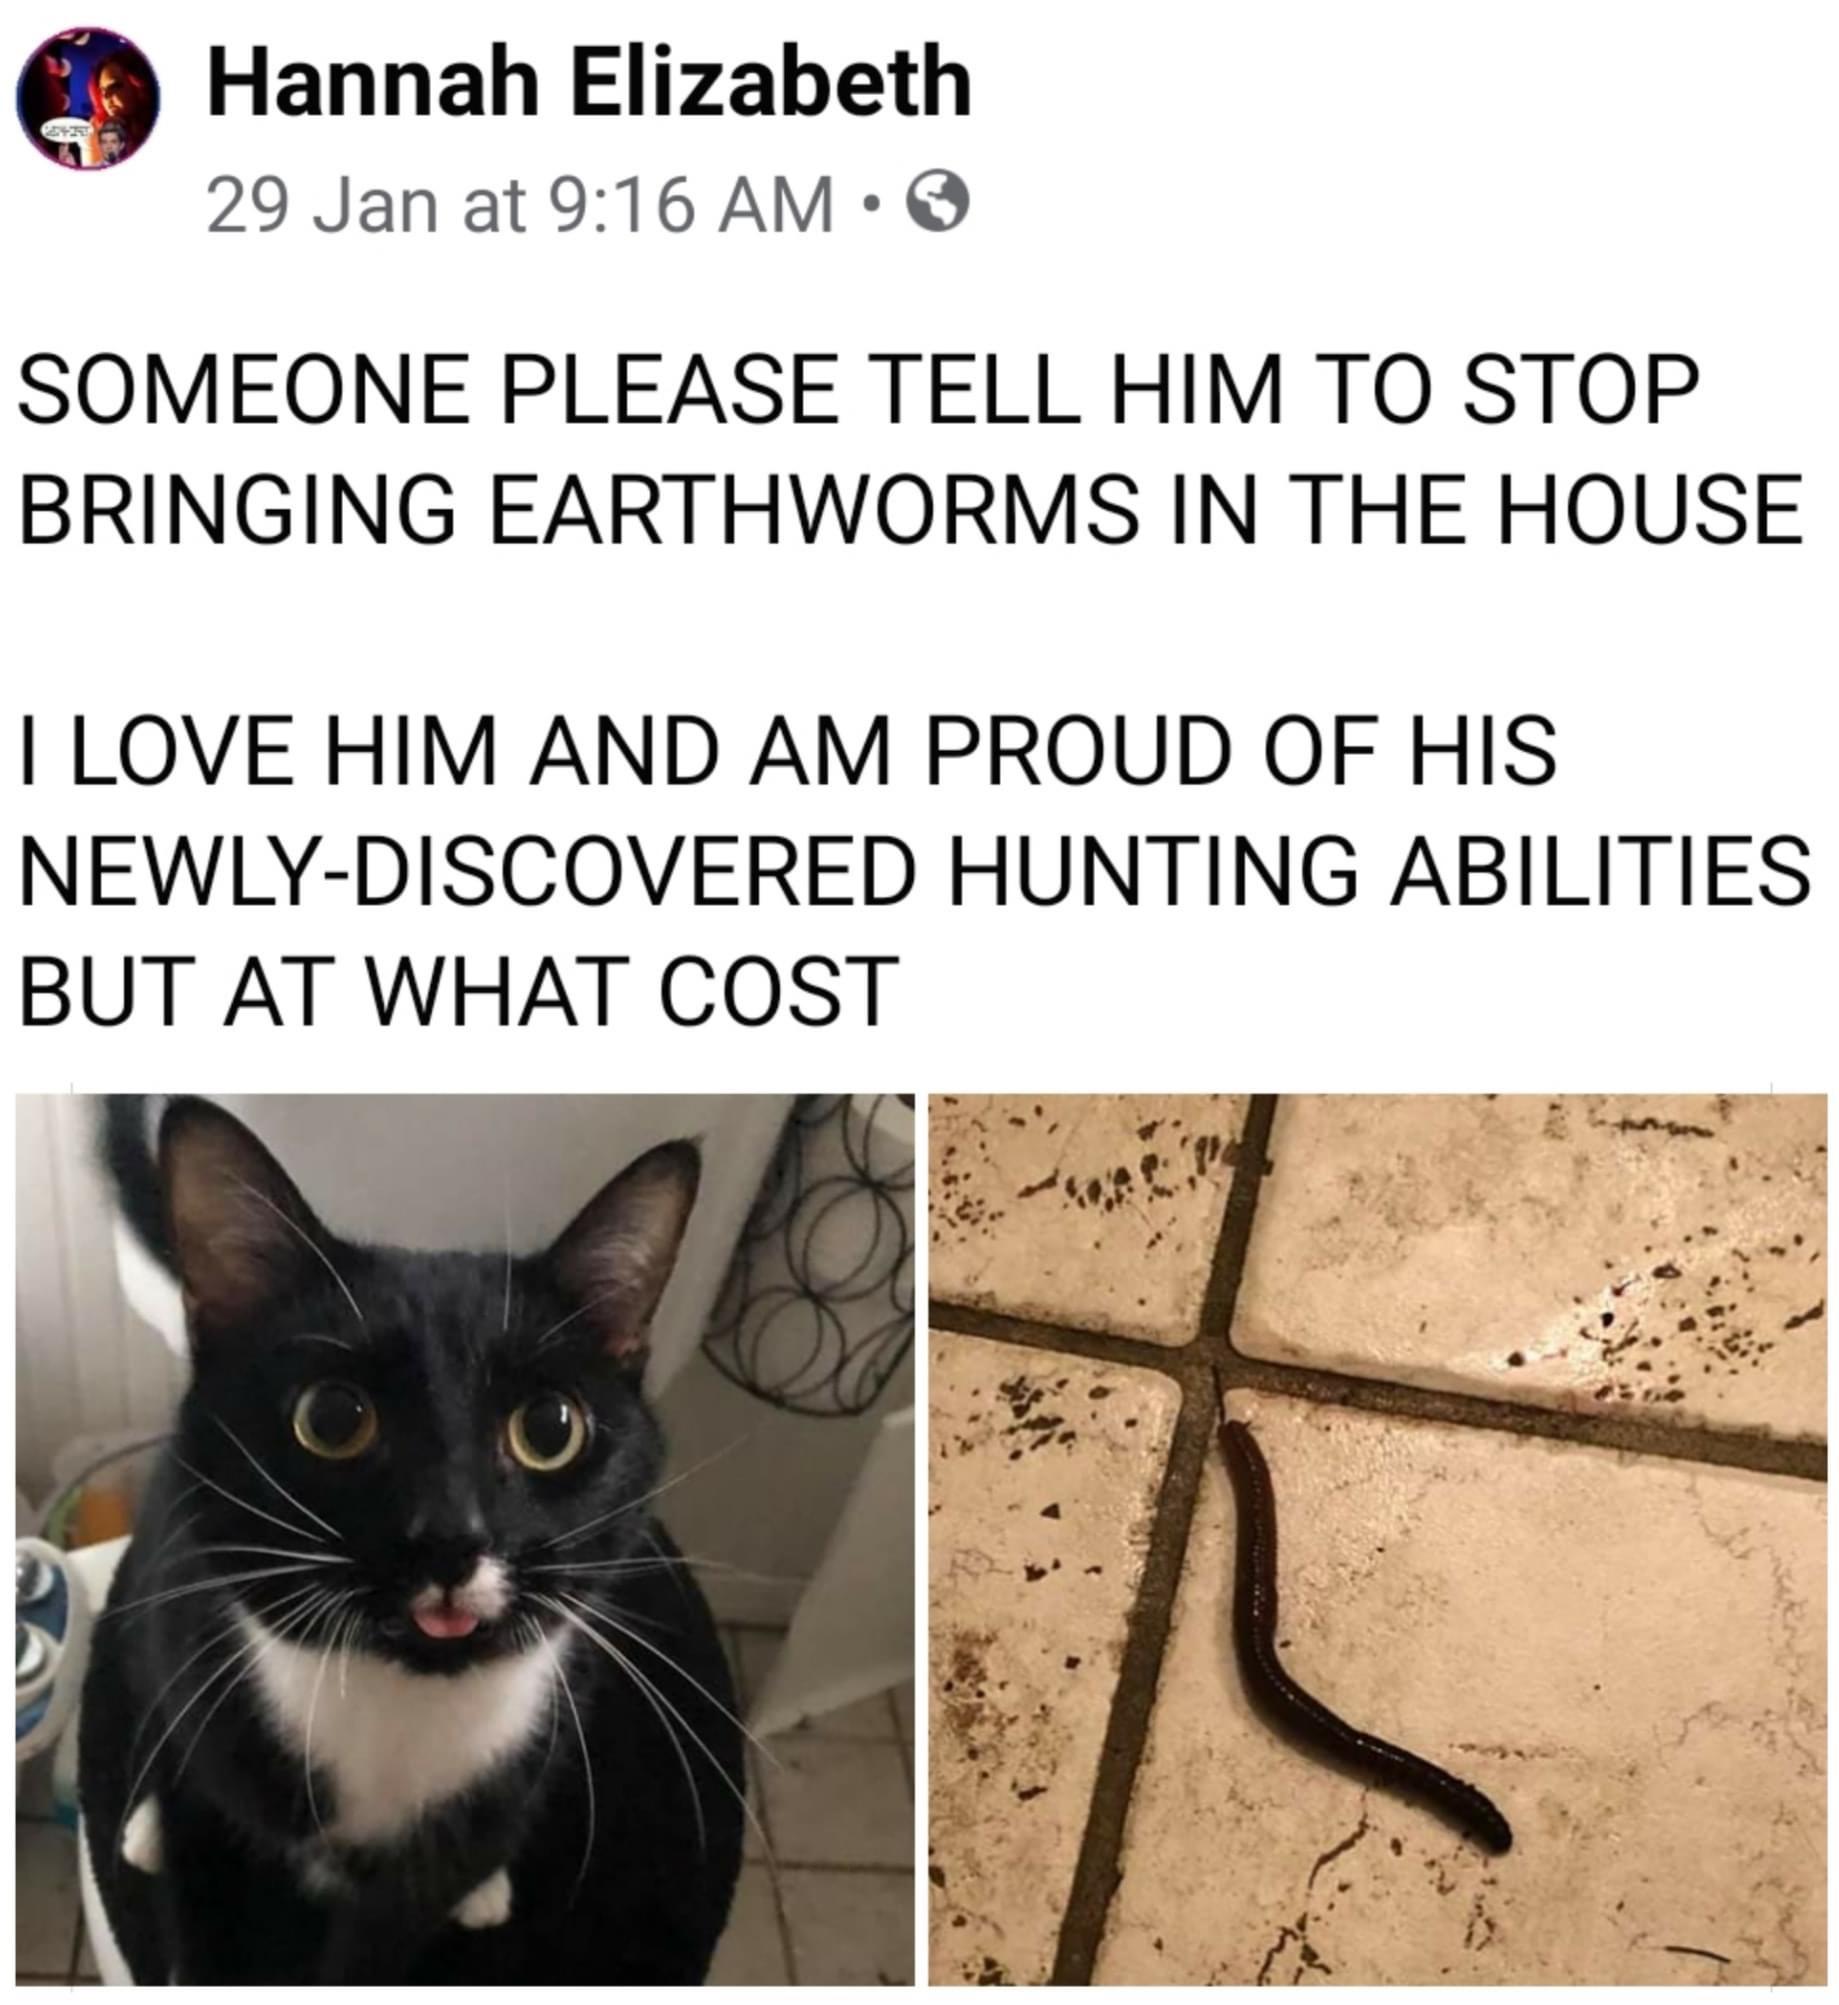 fauna - Hannah Elizabeth 29 Jan at Someone Please Tell Him To Stop Bringing Earthworms In The House I Love Him And Am Proud Of His NewlyDiscovered Hunting Abilities But At What Cost